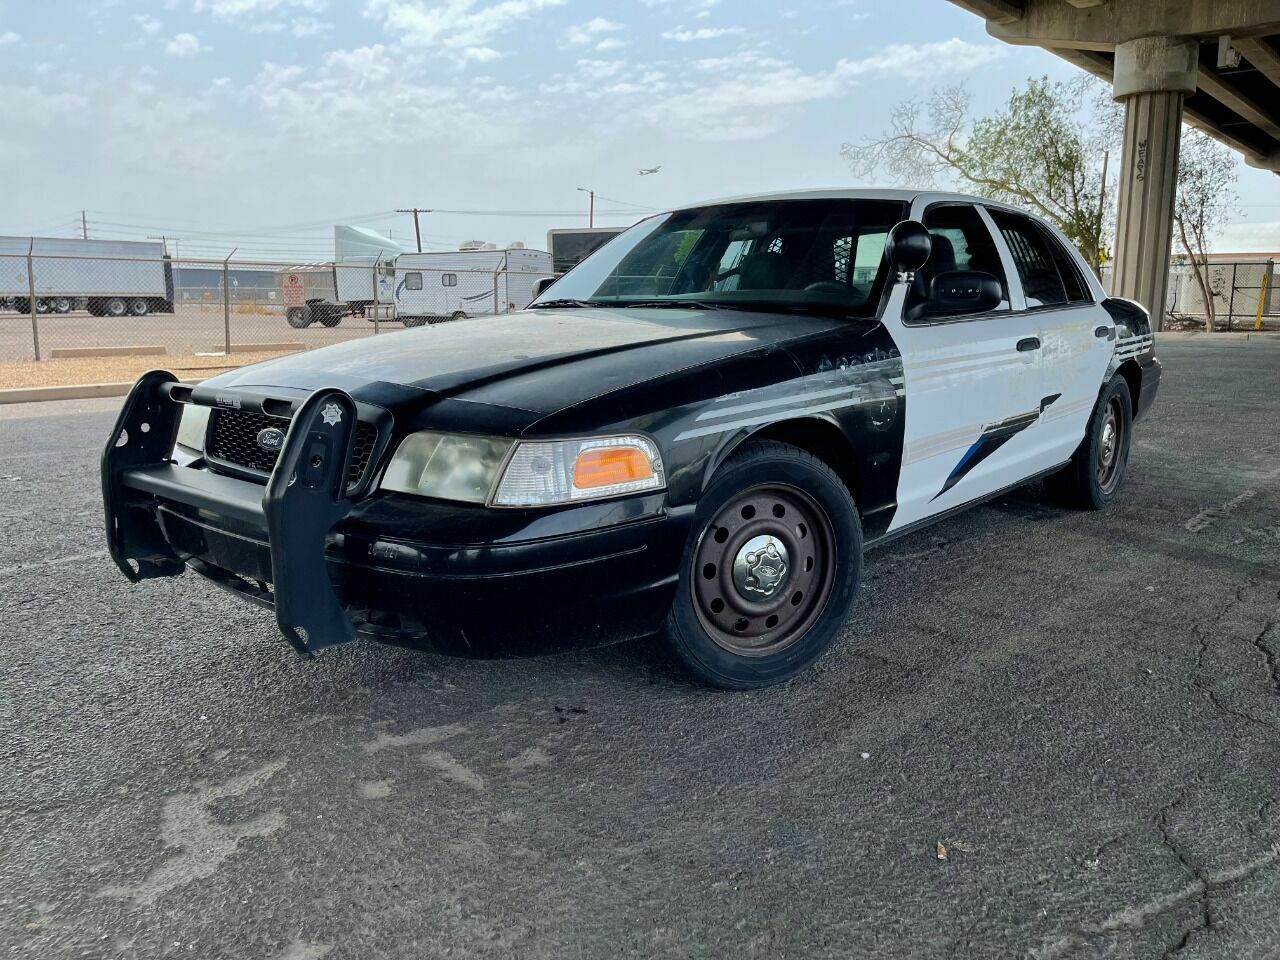 2010 Ford Crown Victoria Police Interceptor 4dr Sedan (3.27 Axle) 2010 Ford Crown Victoria Police Interceptor 4dr Sedan (3.27 Axle)